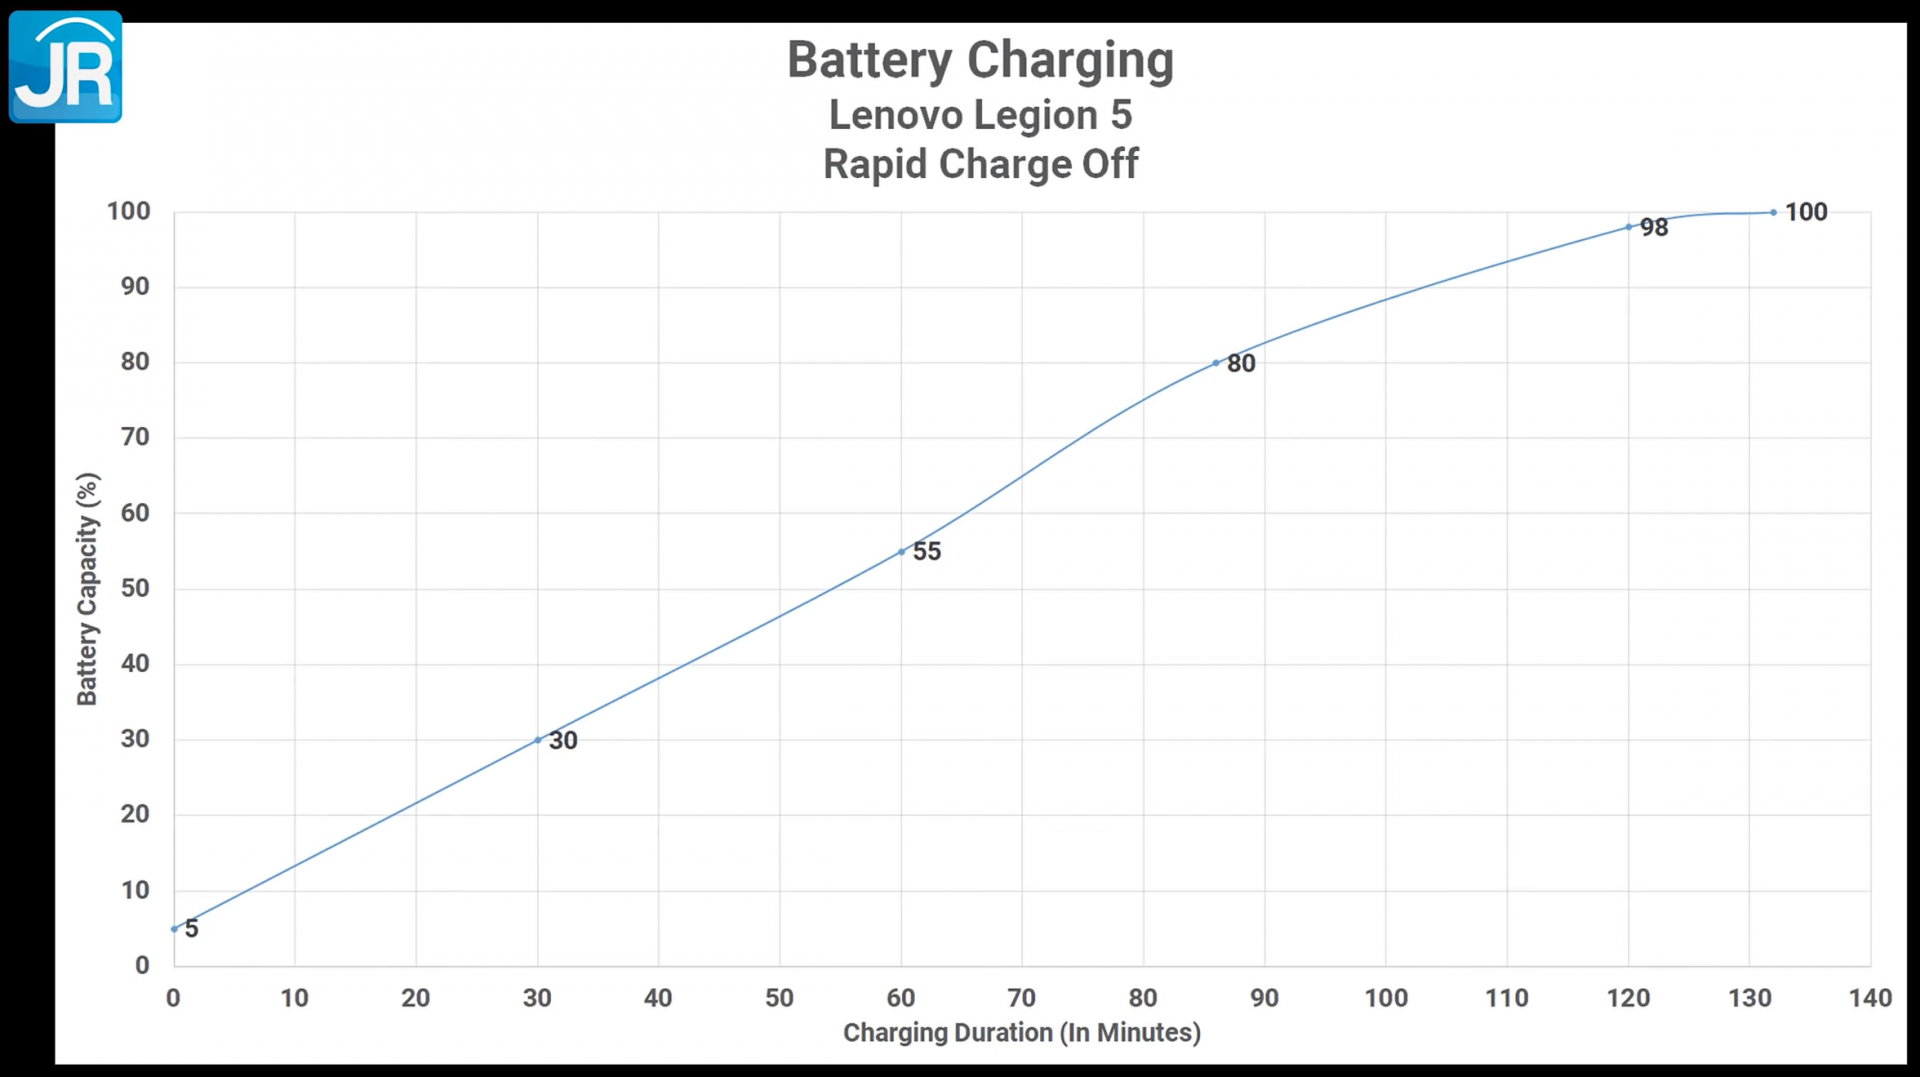 BATTERY RAPID CHARGE OFF